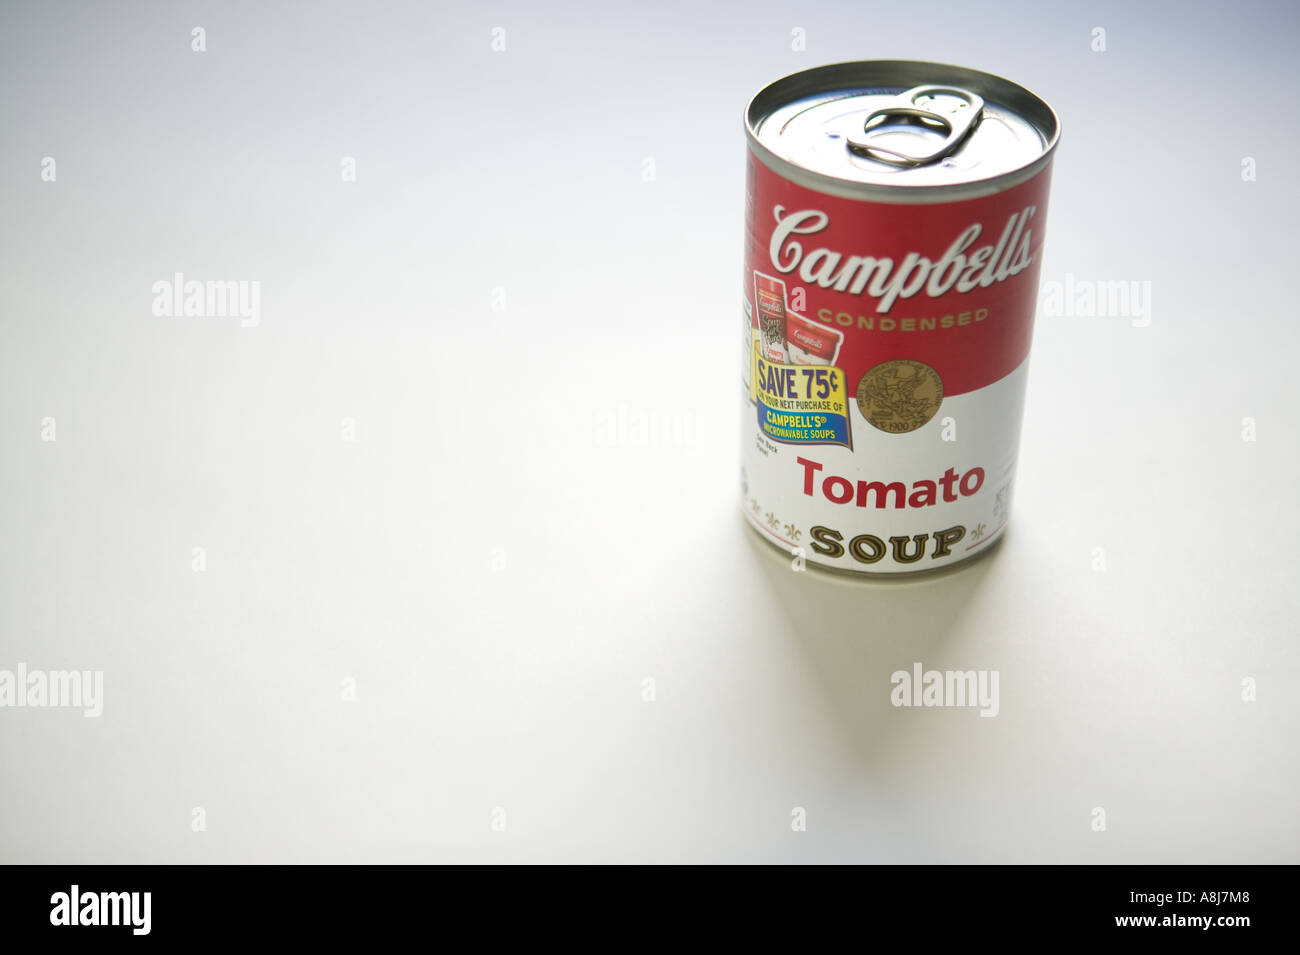 Sudio shot of a can of Campbell s tomato soup sits on a white surface background 2006 Stock Photo